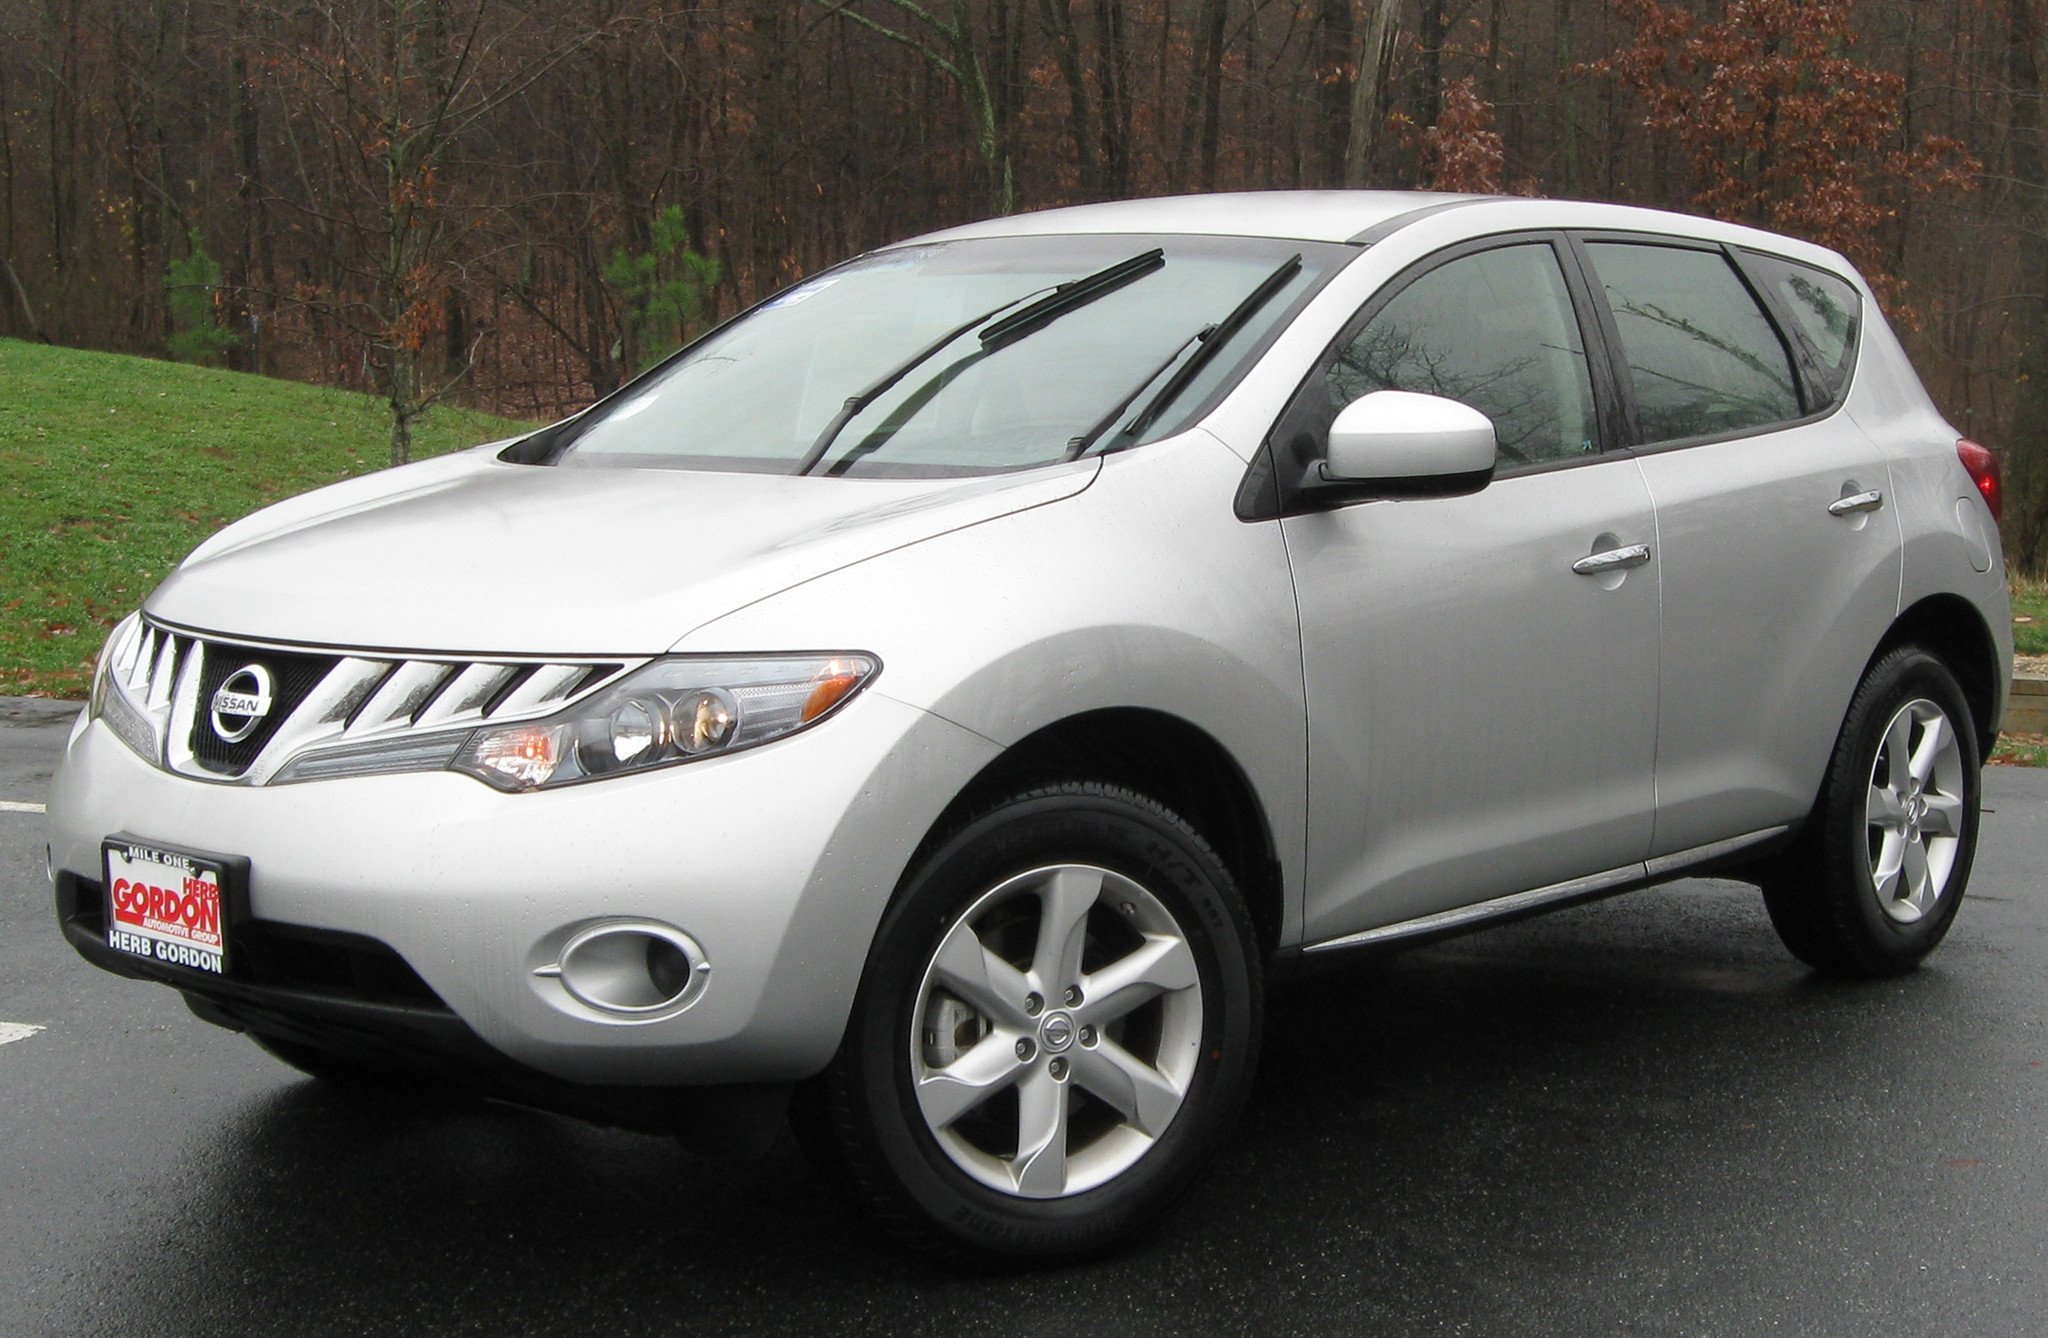 2011 Nissan Murano Cross Cabriolet Z51 Series Factory Service Repair Manual INSTANT DOWNLOAD